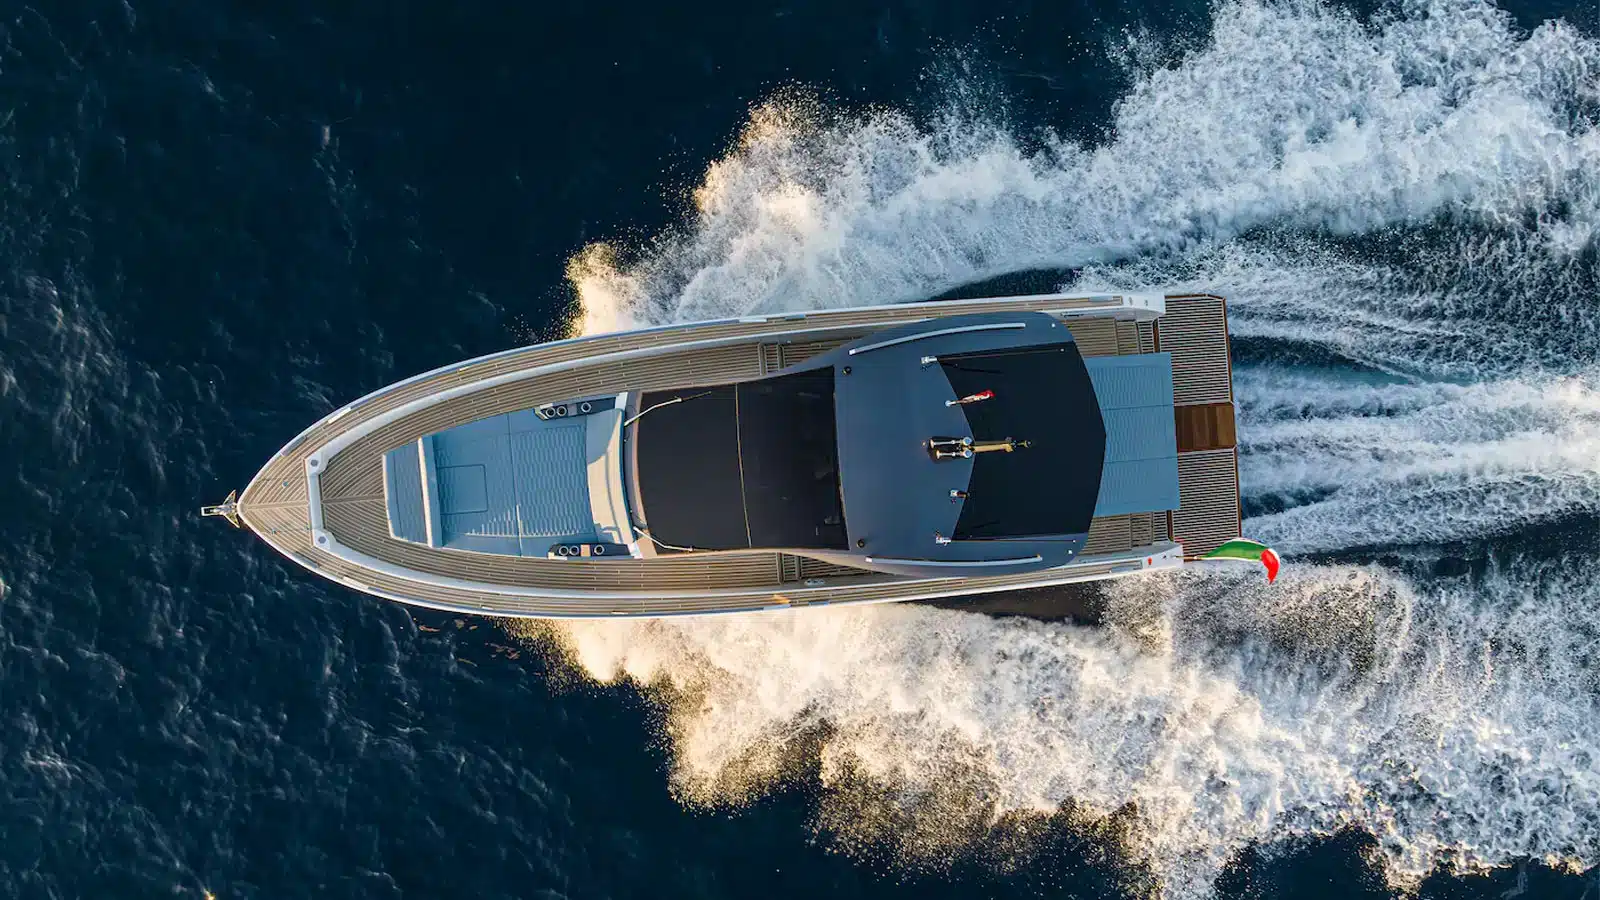 Fiart at the Palma International Boat Show: Spanish debut for the Seawalker 35 and 45